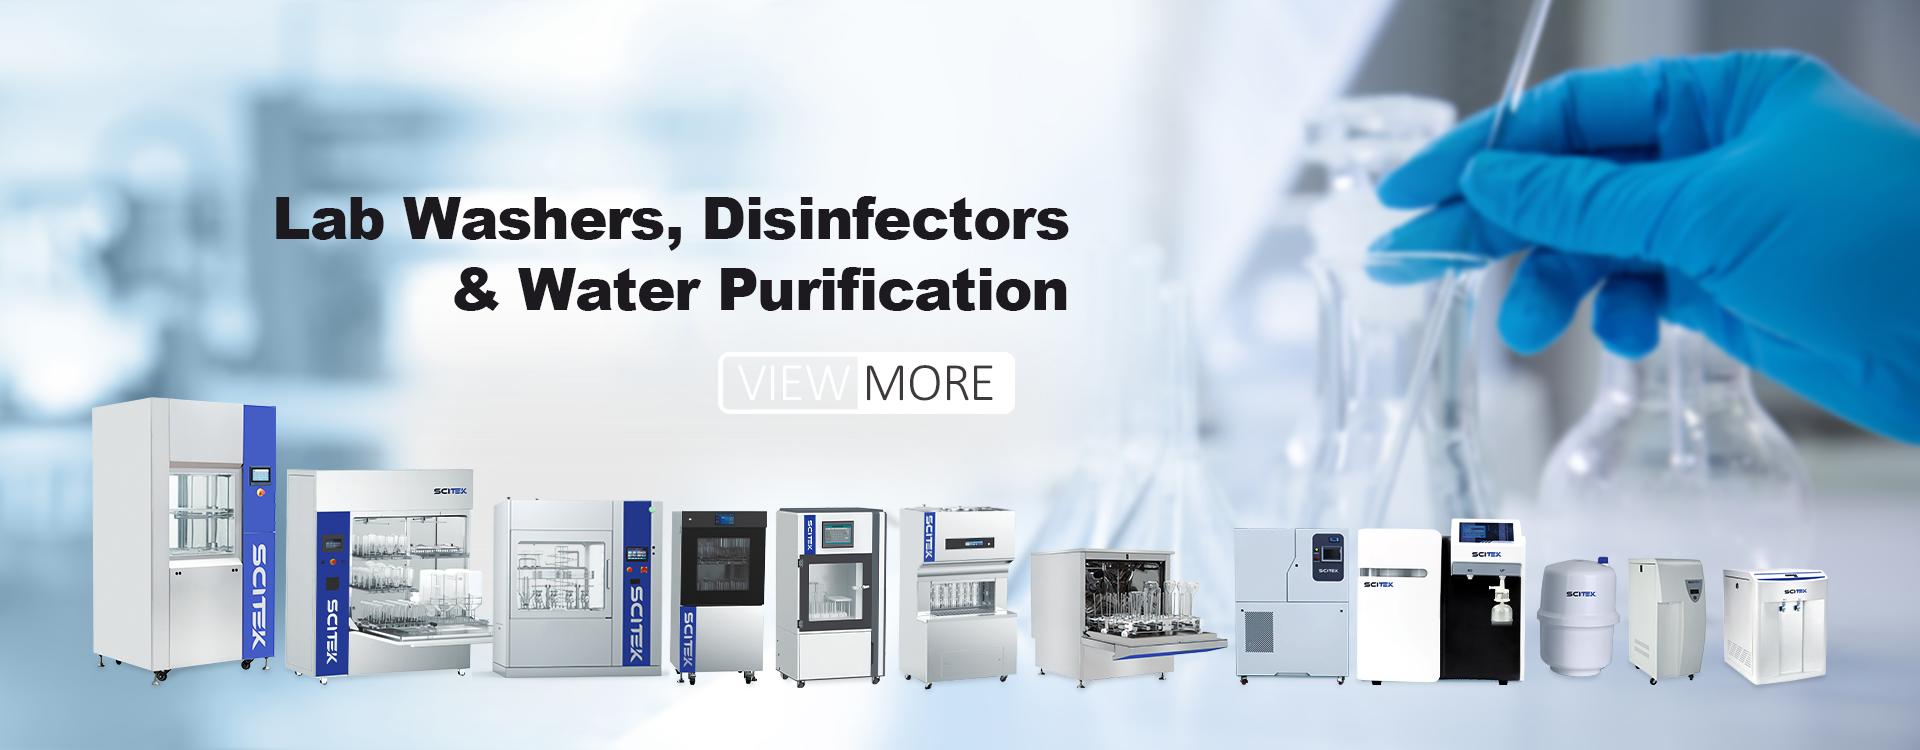 Scitek Lab Washers, Disinfectors & Water Purification